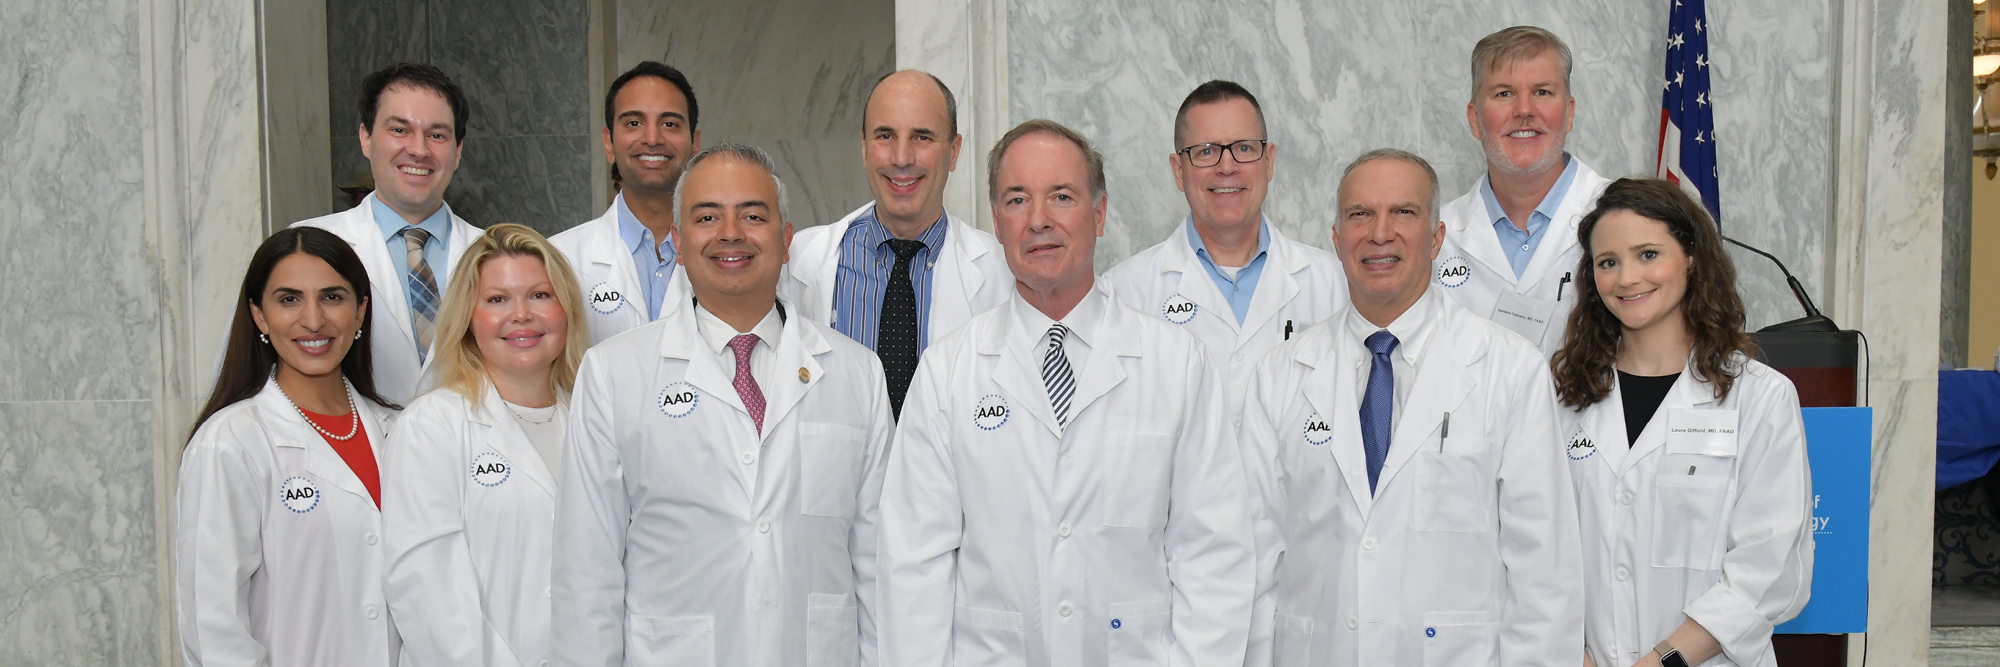 Image for AADA hosts largest Capitol Hill skin cancer check in a decade